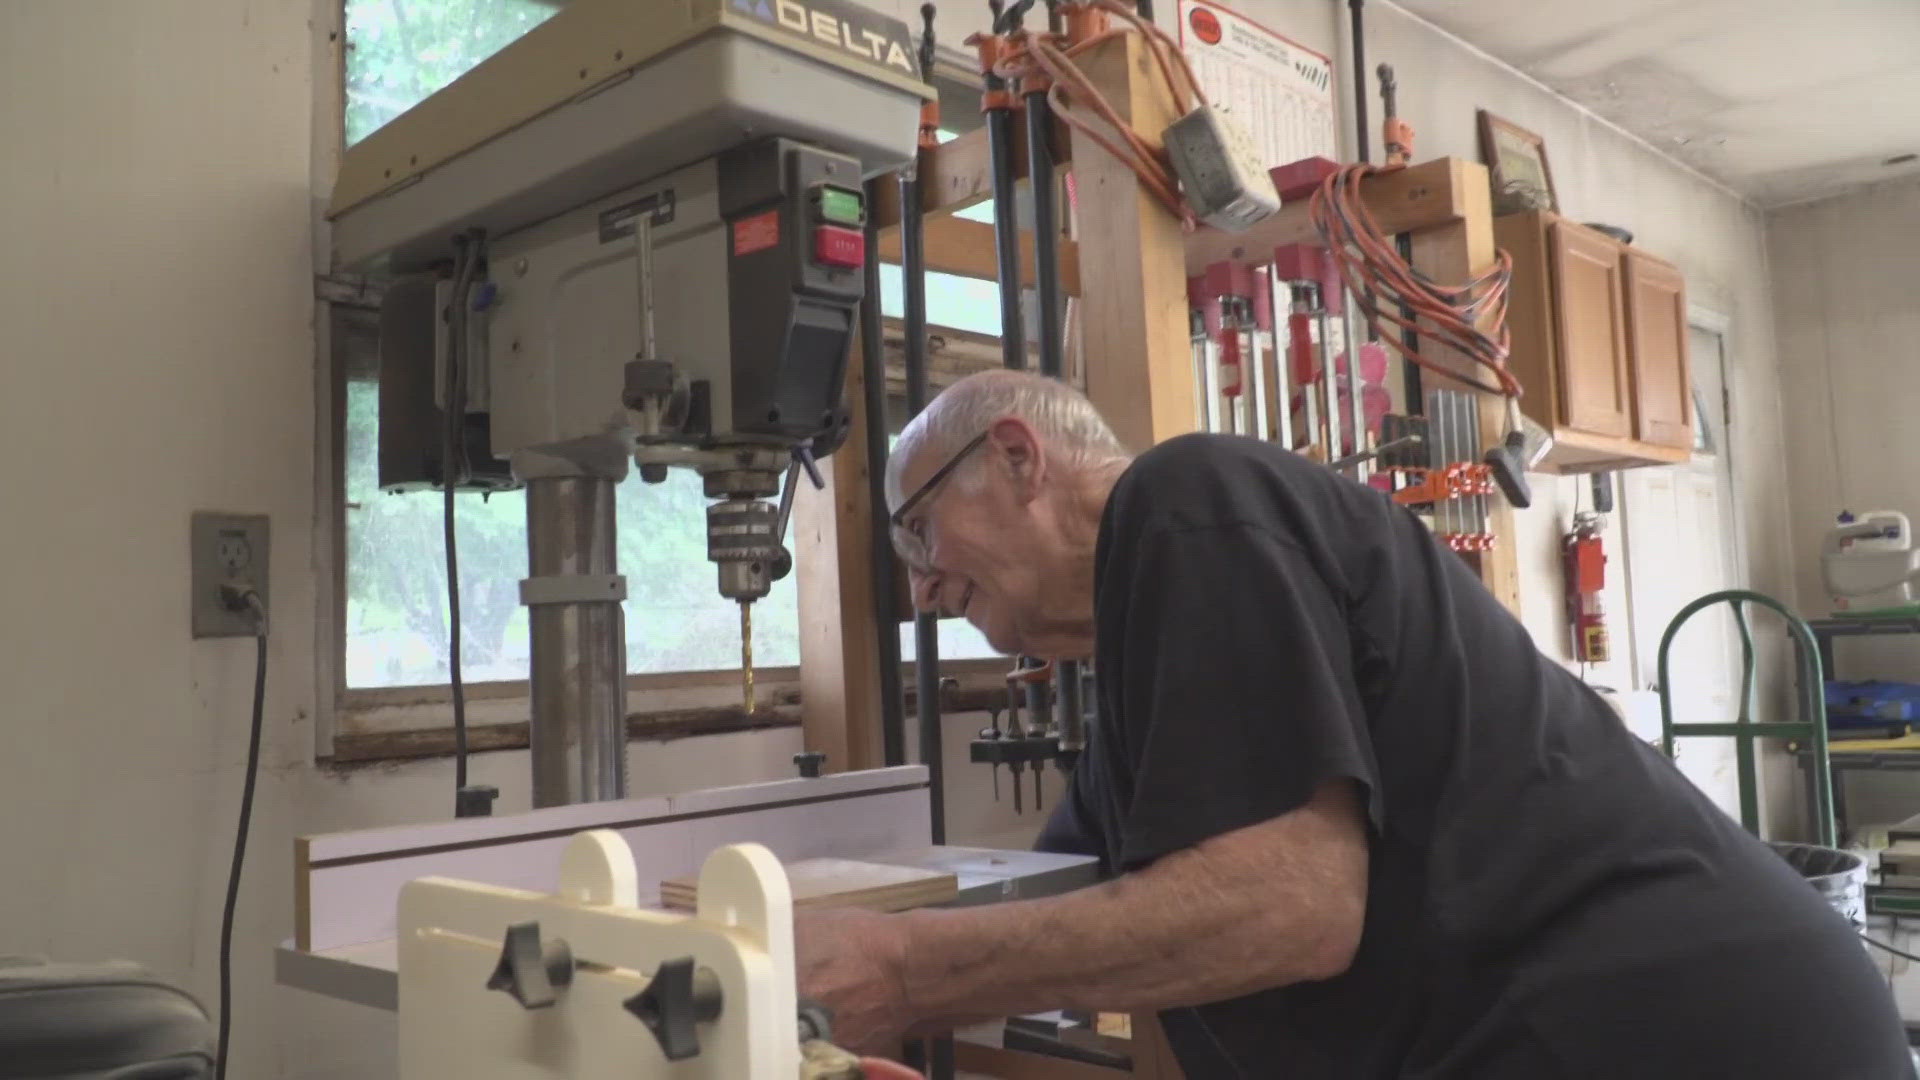 After a 40-year career at Goodyear, Cuyahoga Falls resident Frank Mungo now spends his days sharing his talent.